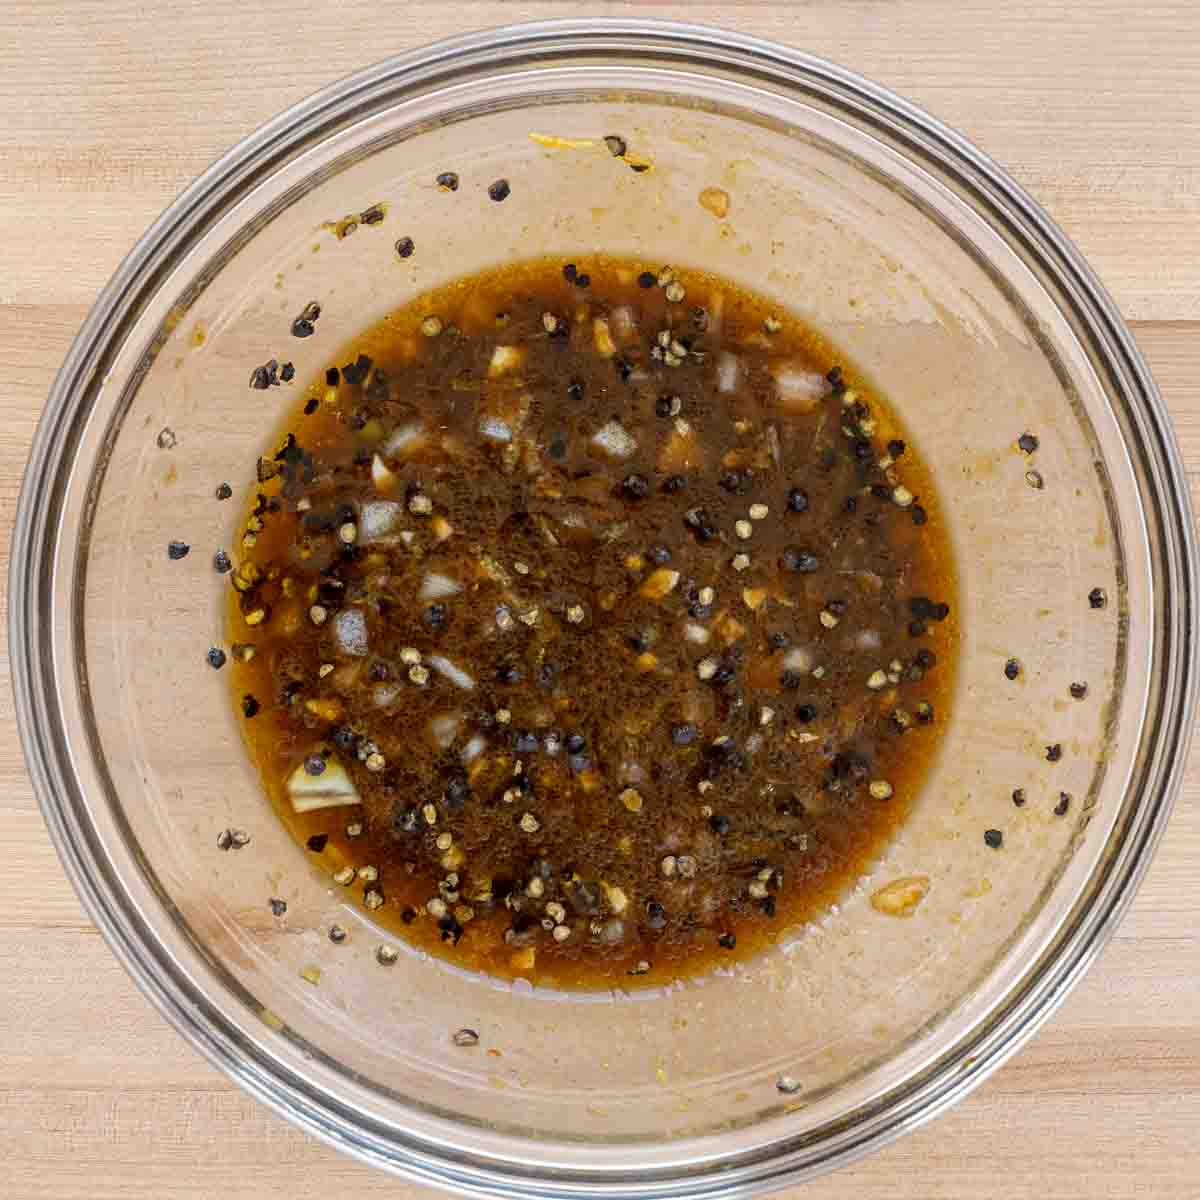 marinade in a glass bowl